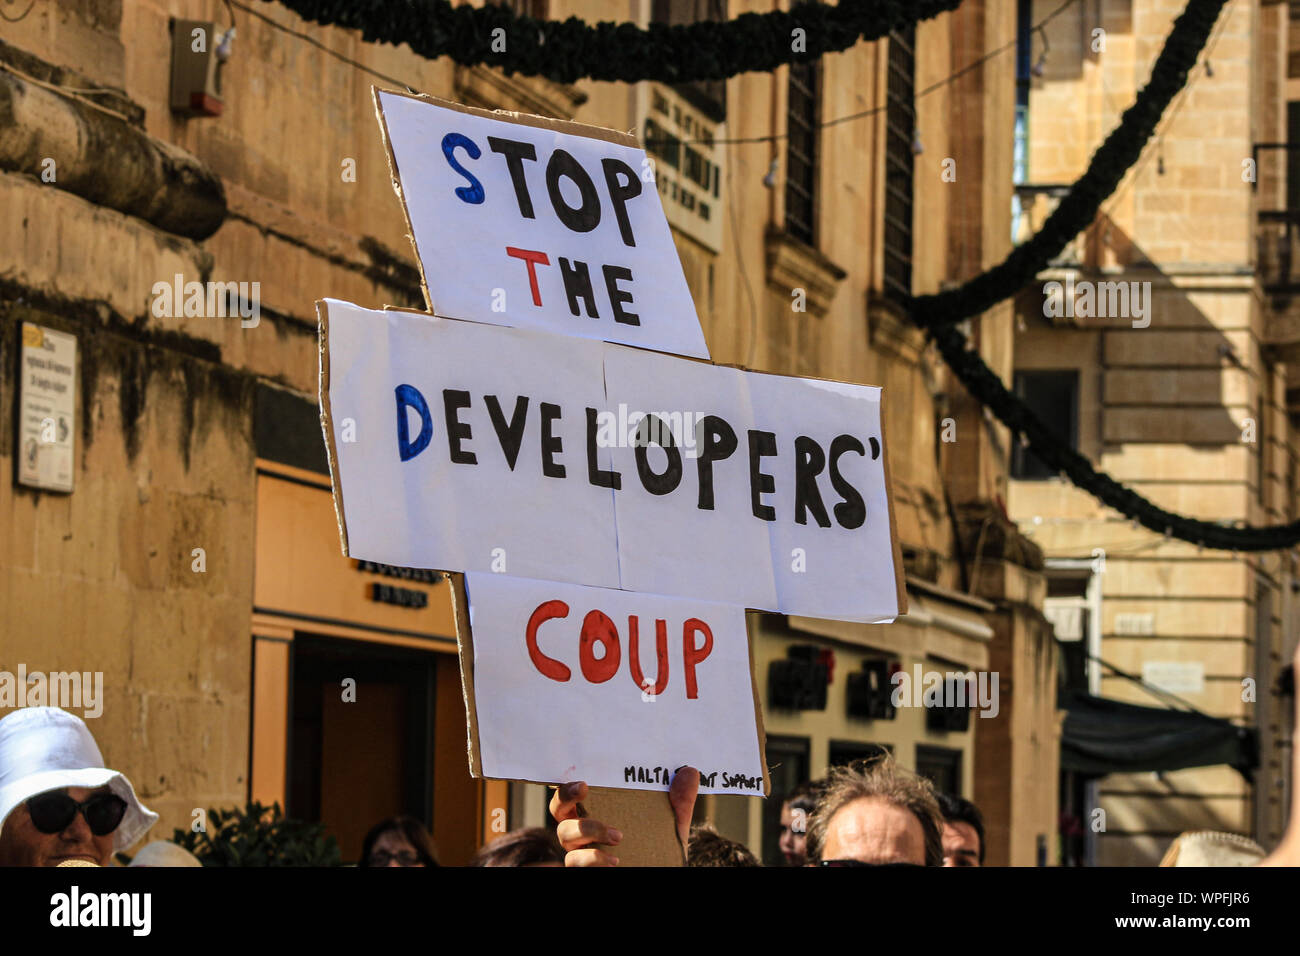 Enough is enough. A demonstration against environmental destruction in Malta. Protesting at out of control construction, road building. Stock Photo